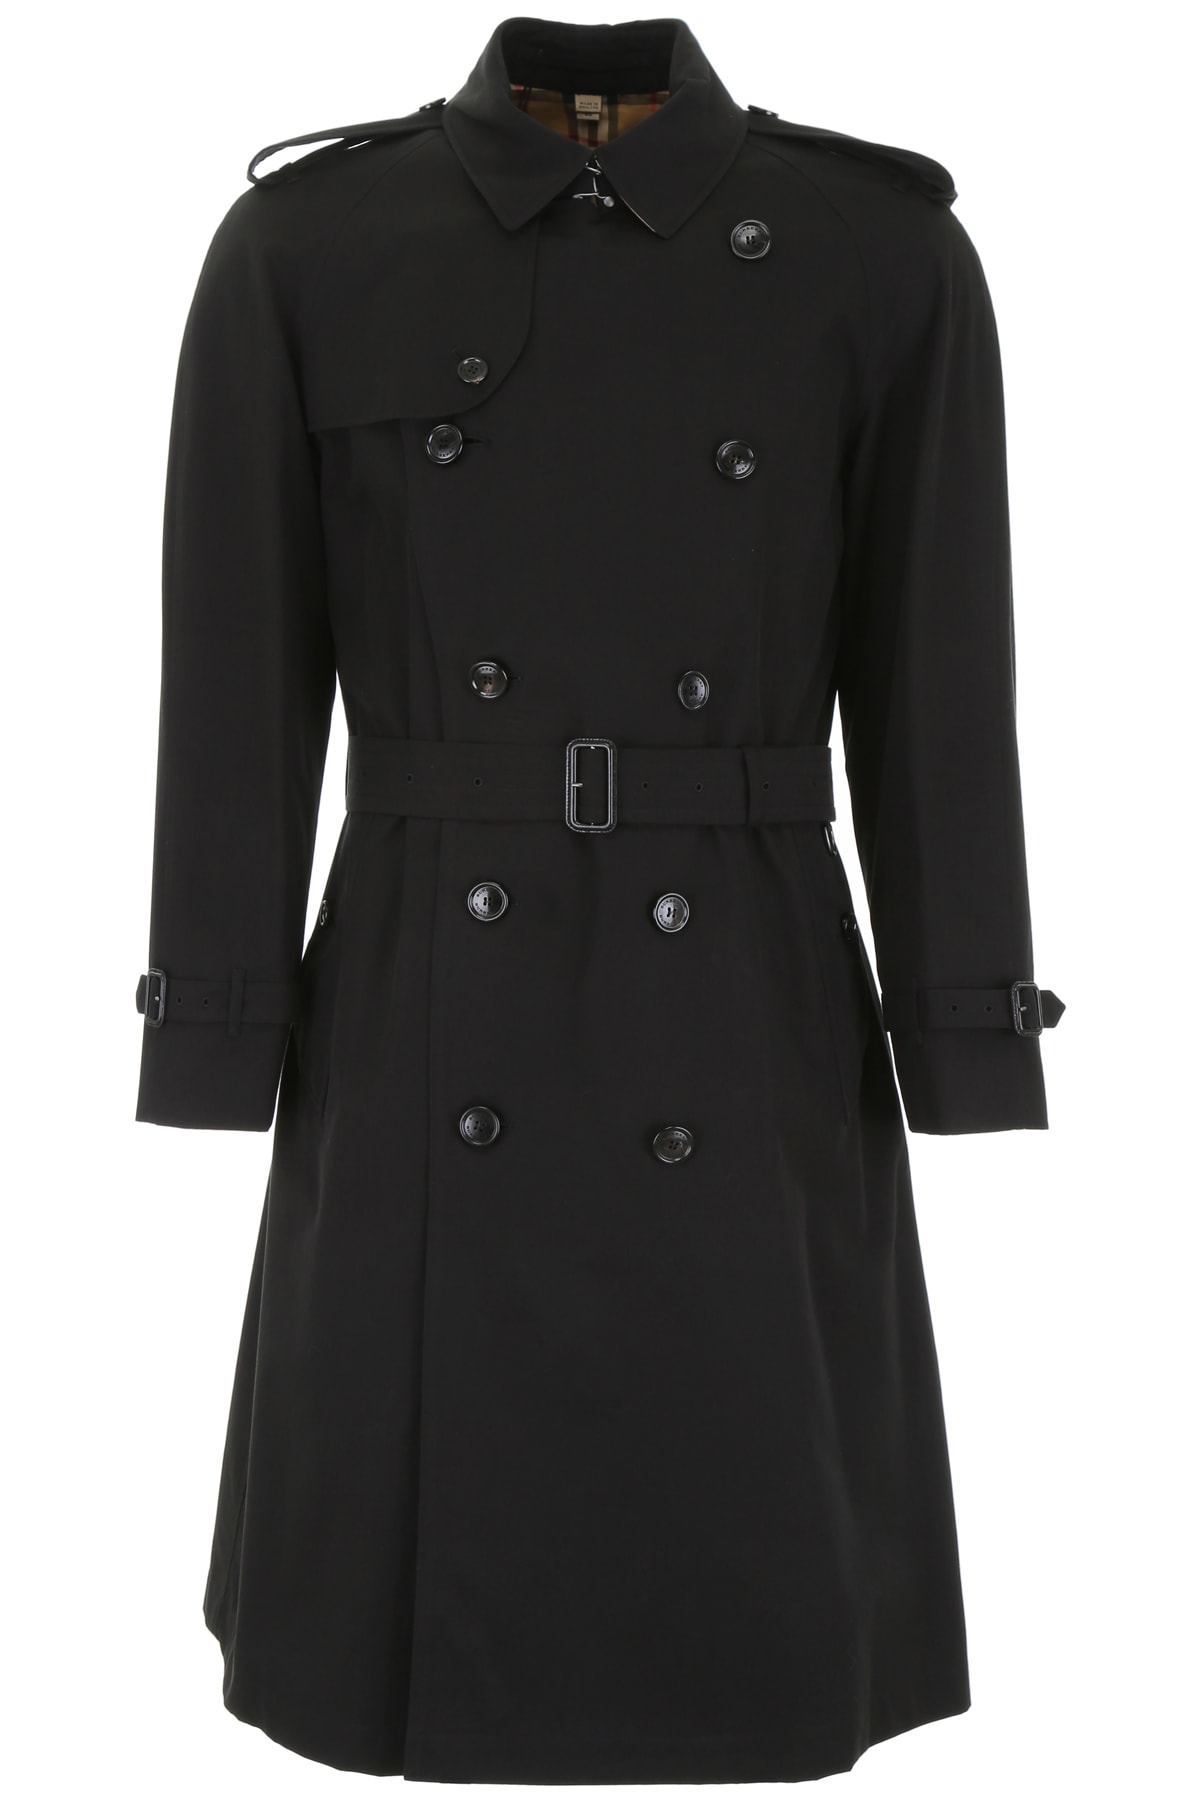 Burberry Burberry Long Westminster Trench Coat - BLACK (Black ...